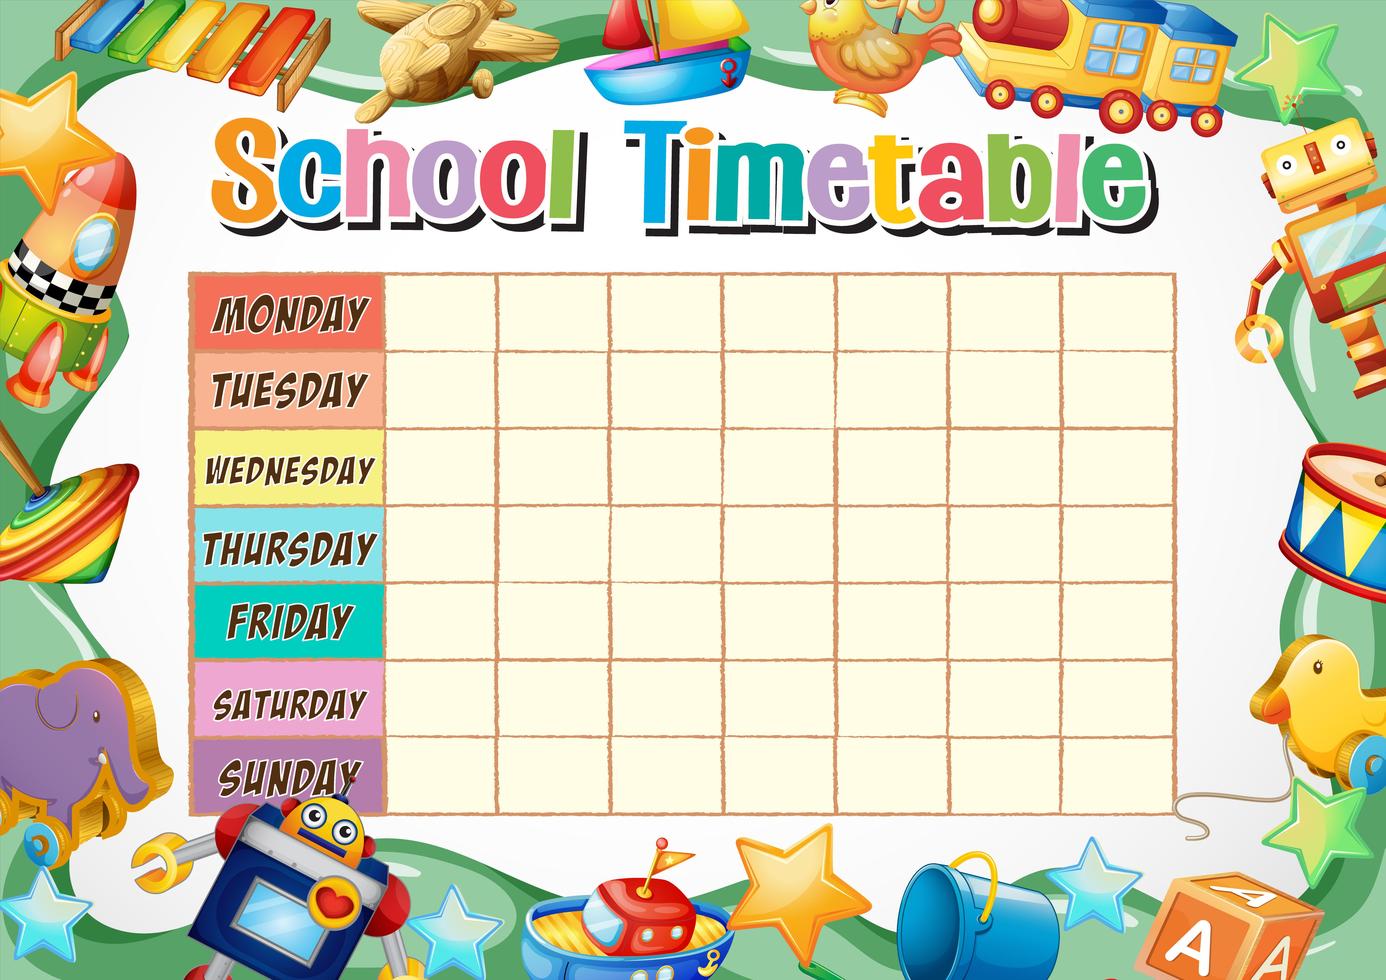 school-timetable-template-with-toy-theme-684961-vector-art-at-vecteezy